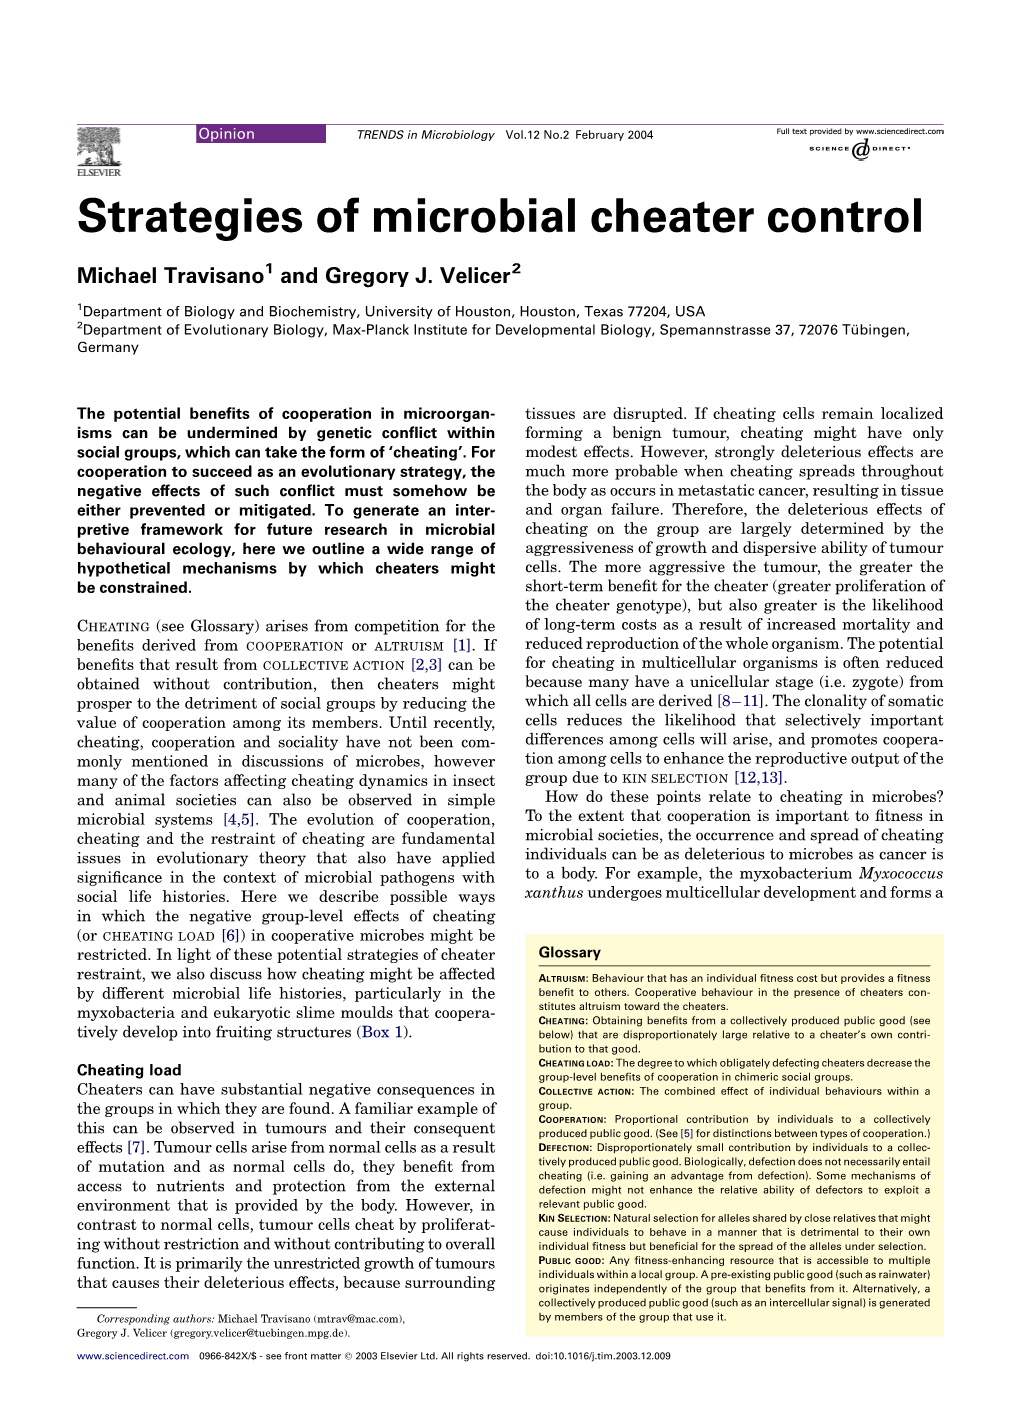 Strategies of Microbial Cheater Control